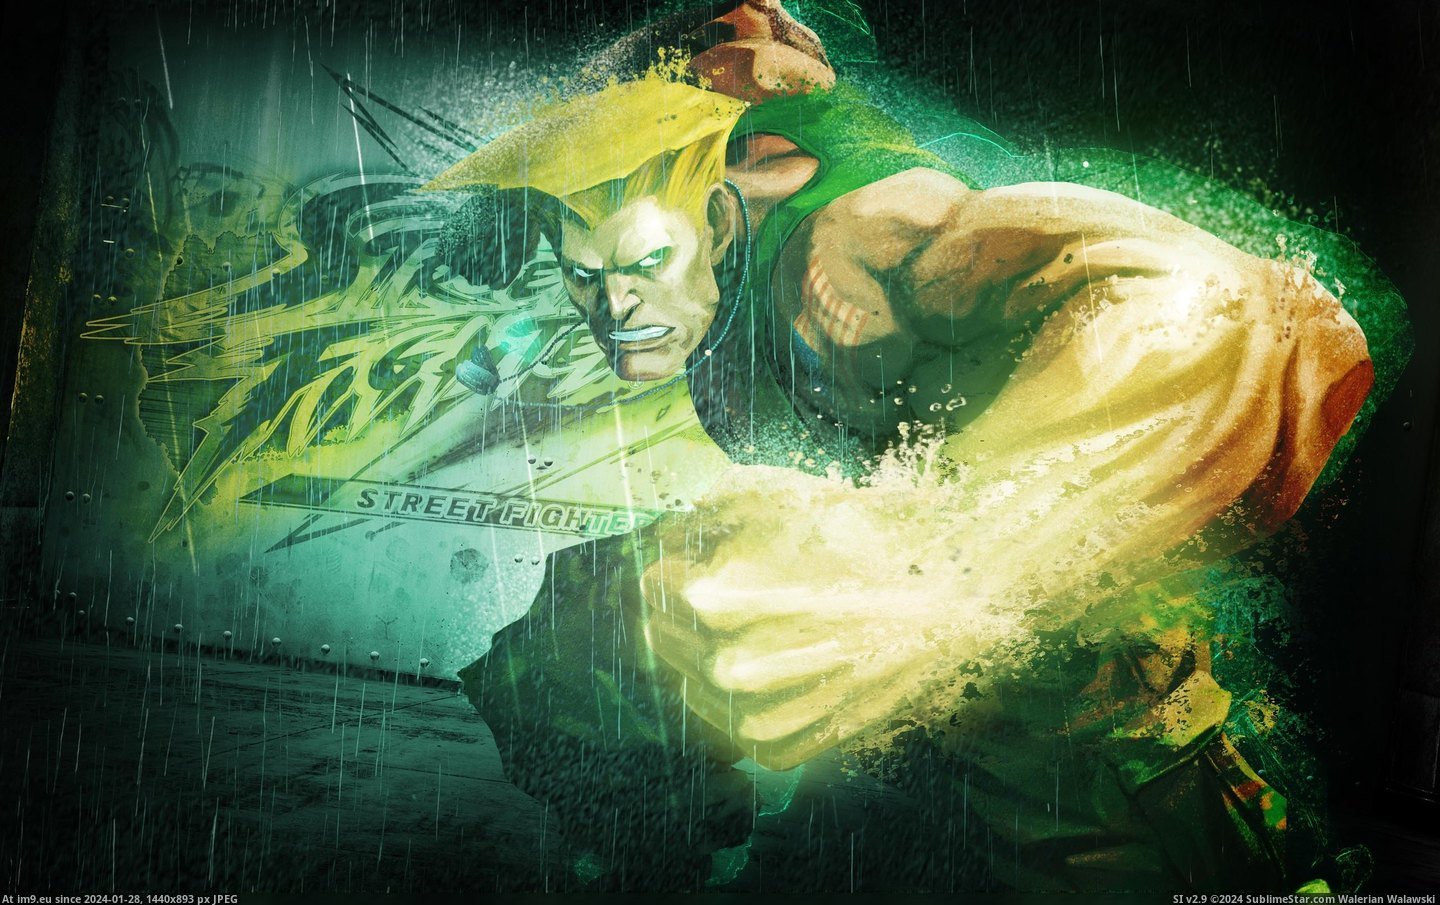 #Wallpaper #Wide #Guile #Street #Fighter Guile In Street Fighter Wide HD Wallpaper Pic. (Изображение из альбом Unique HD Wallpapers))